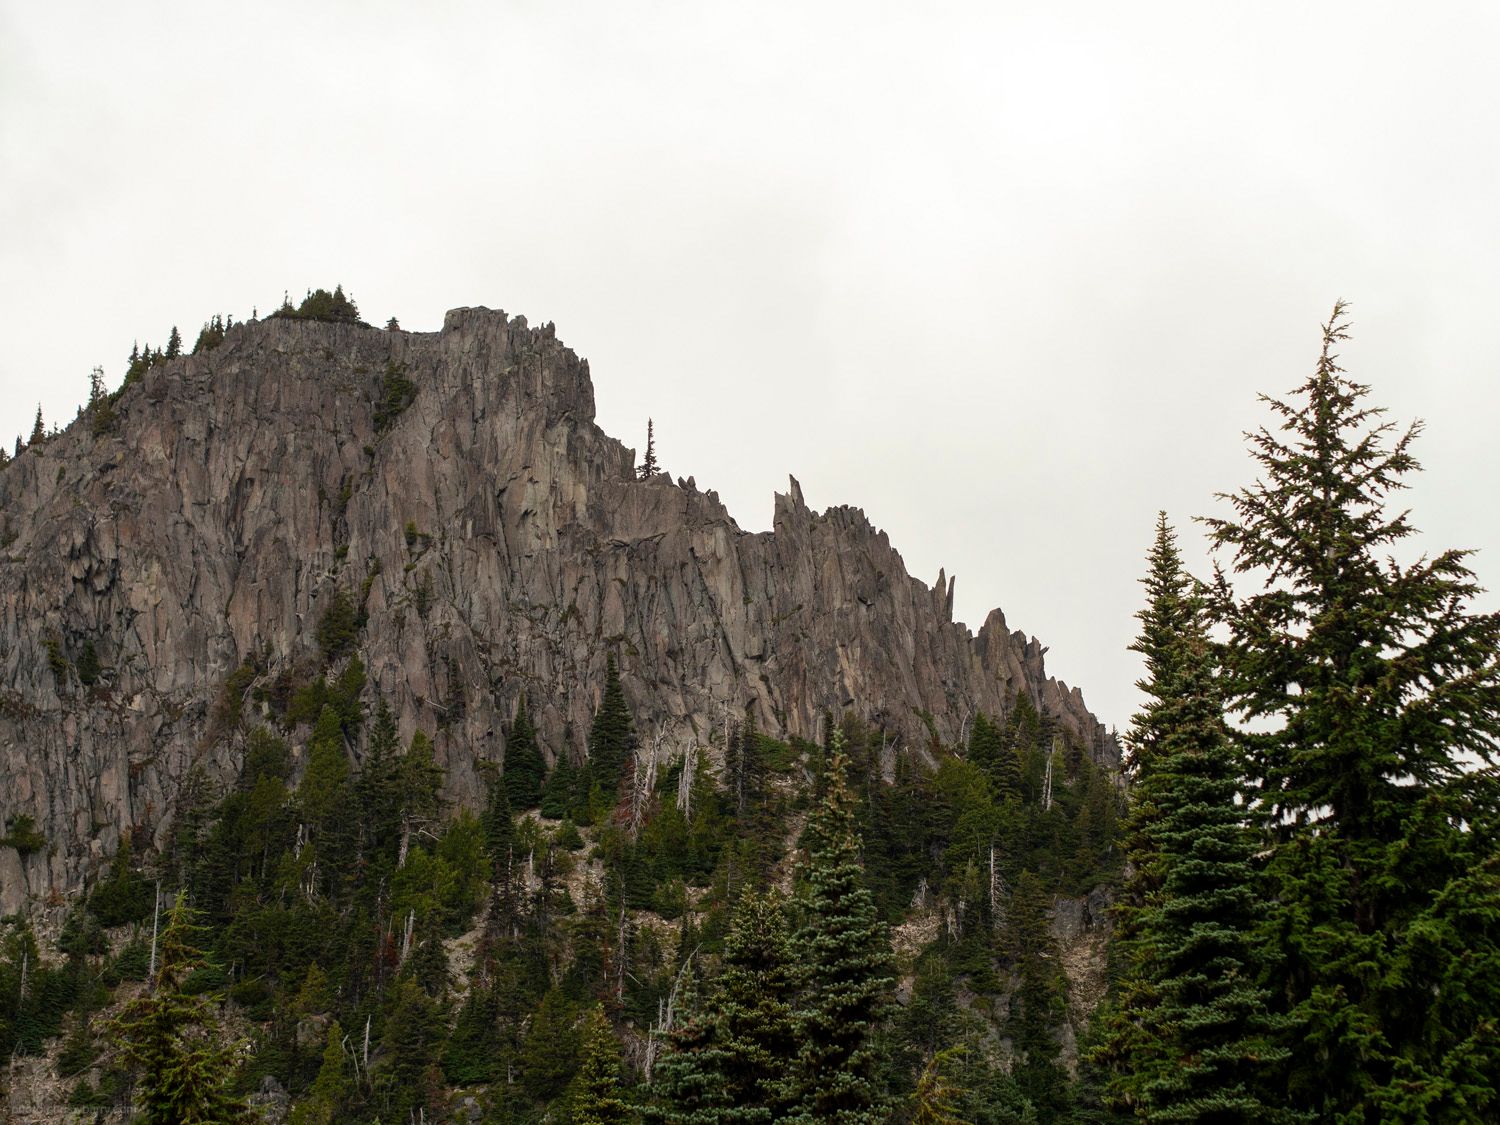 Photograph of a treeless rocky mountain, textured with vertical lines. A couple of pine trees are in the foreground